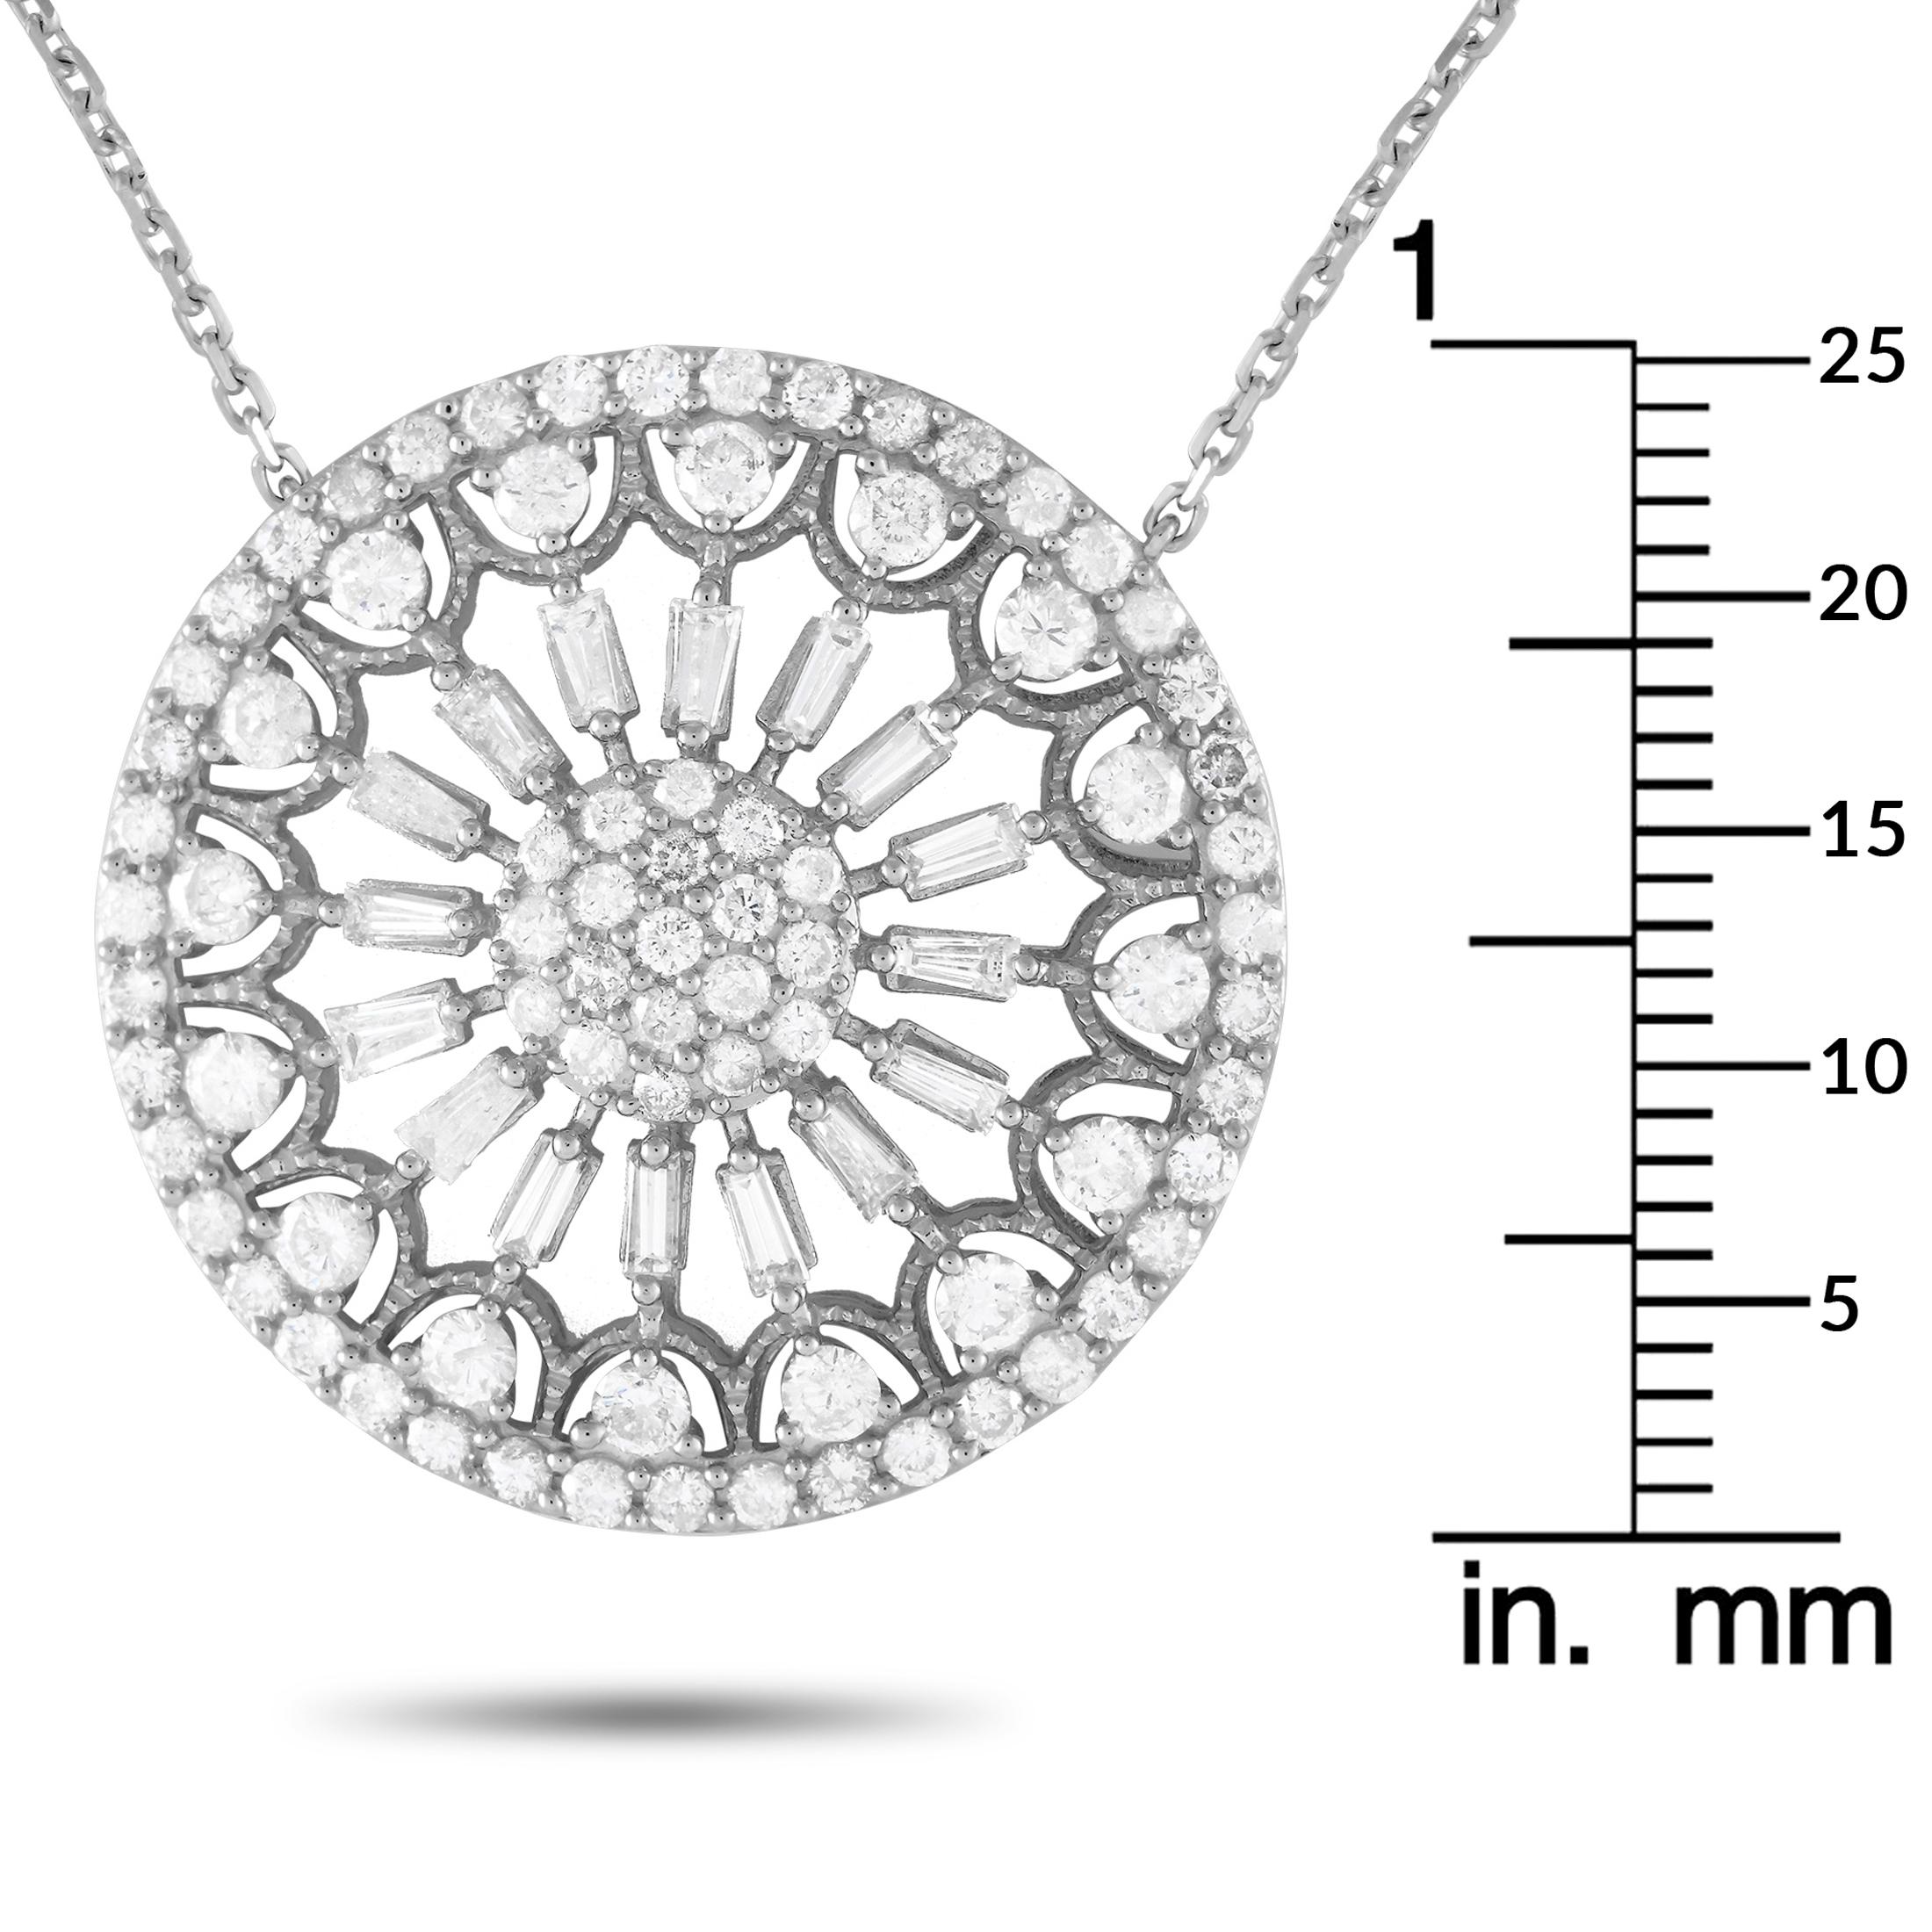 14K White Gold 2.25ct Diamond Filigree Medallion Necklace PN15244-W In New Condition For Sale In Southampton, PA